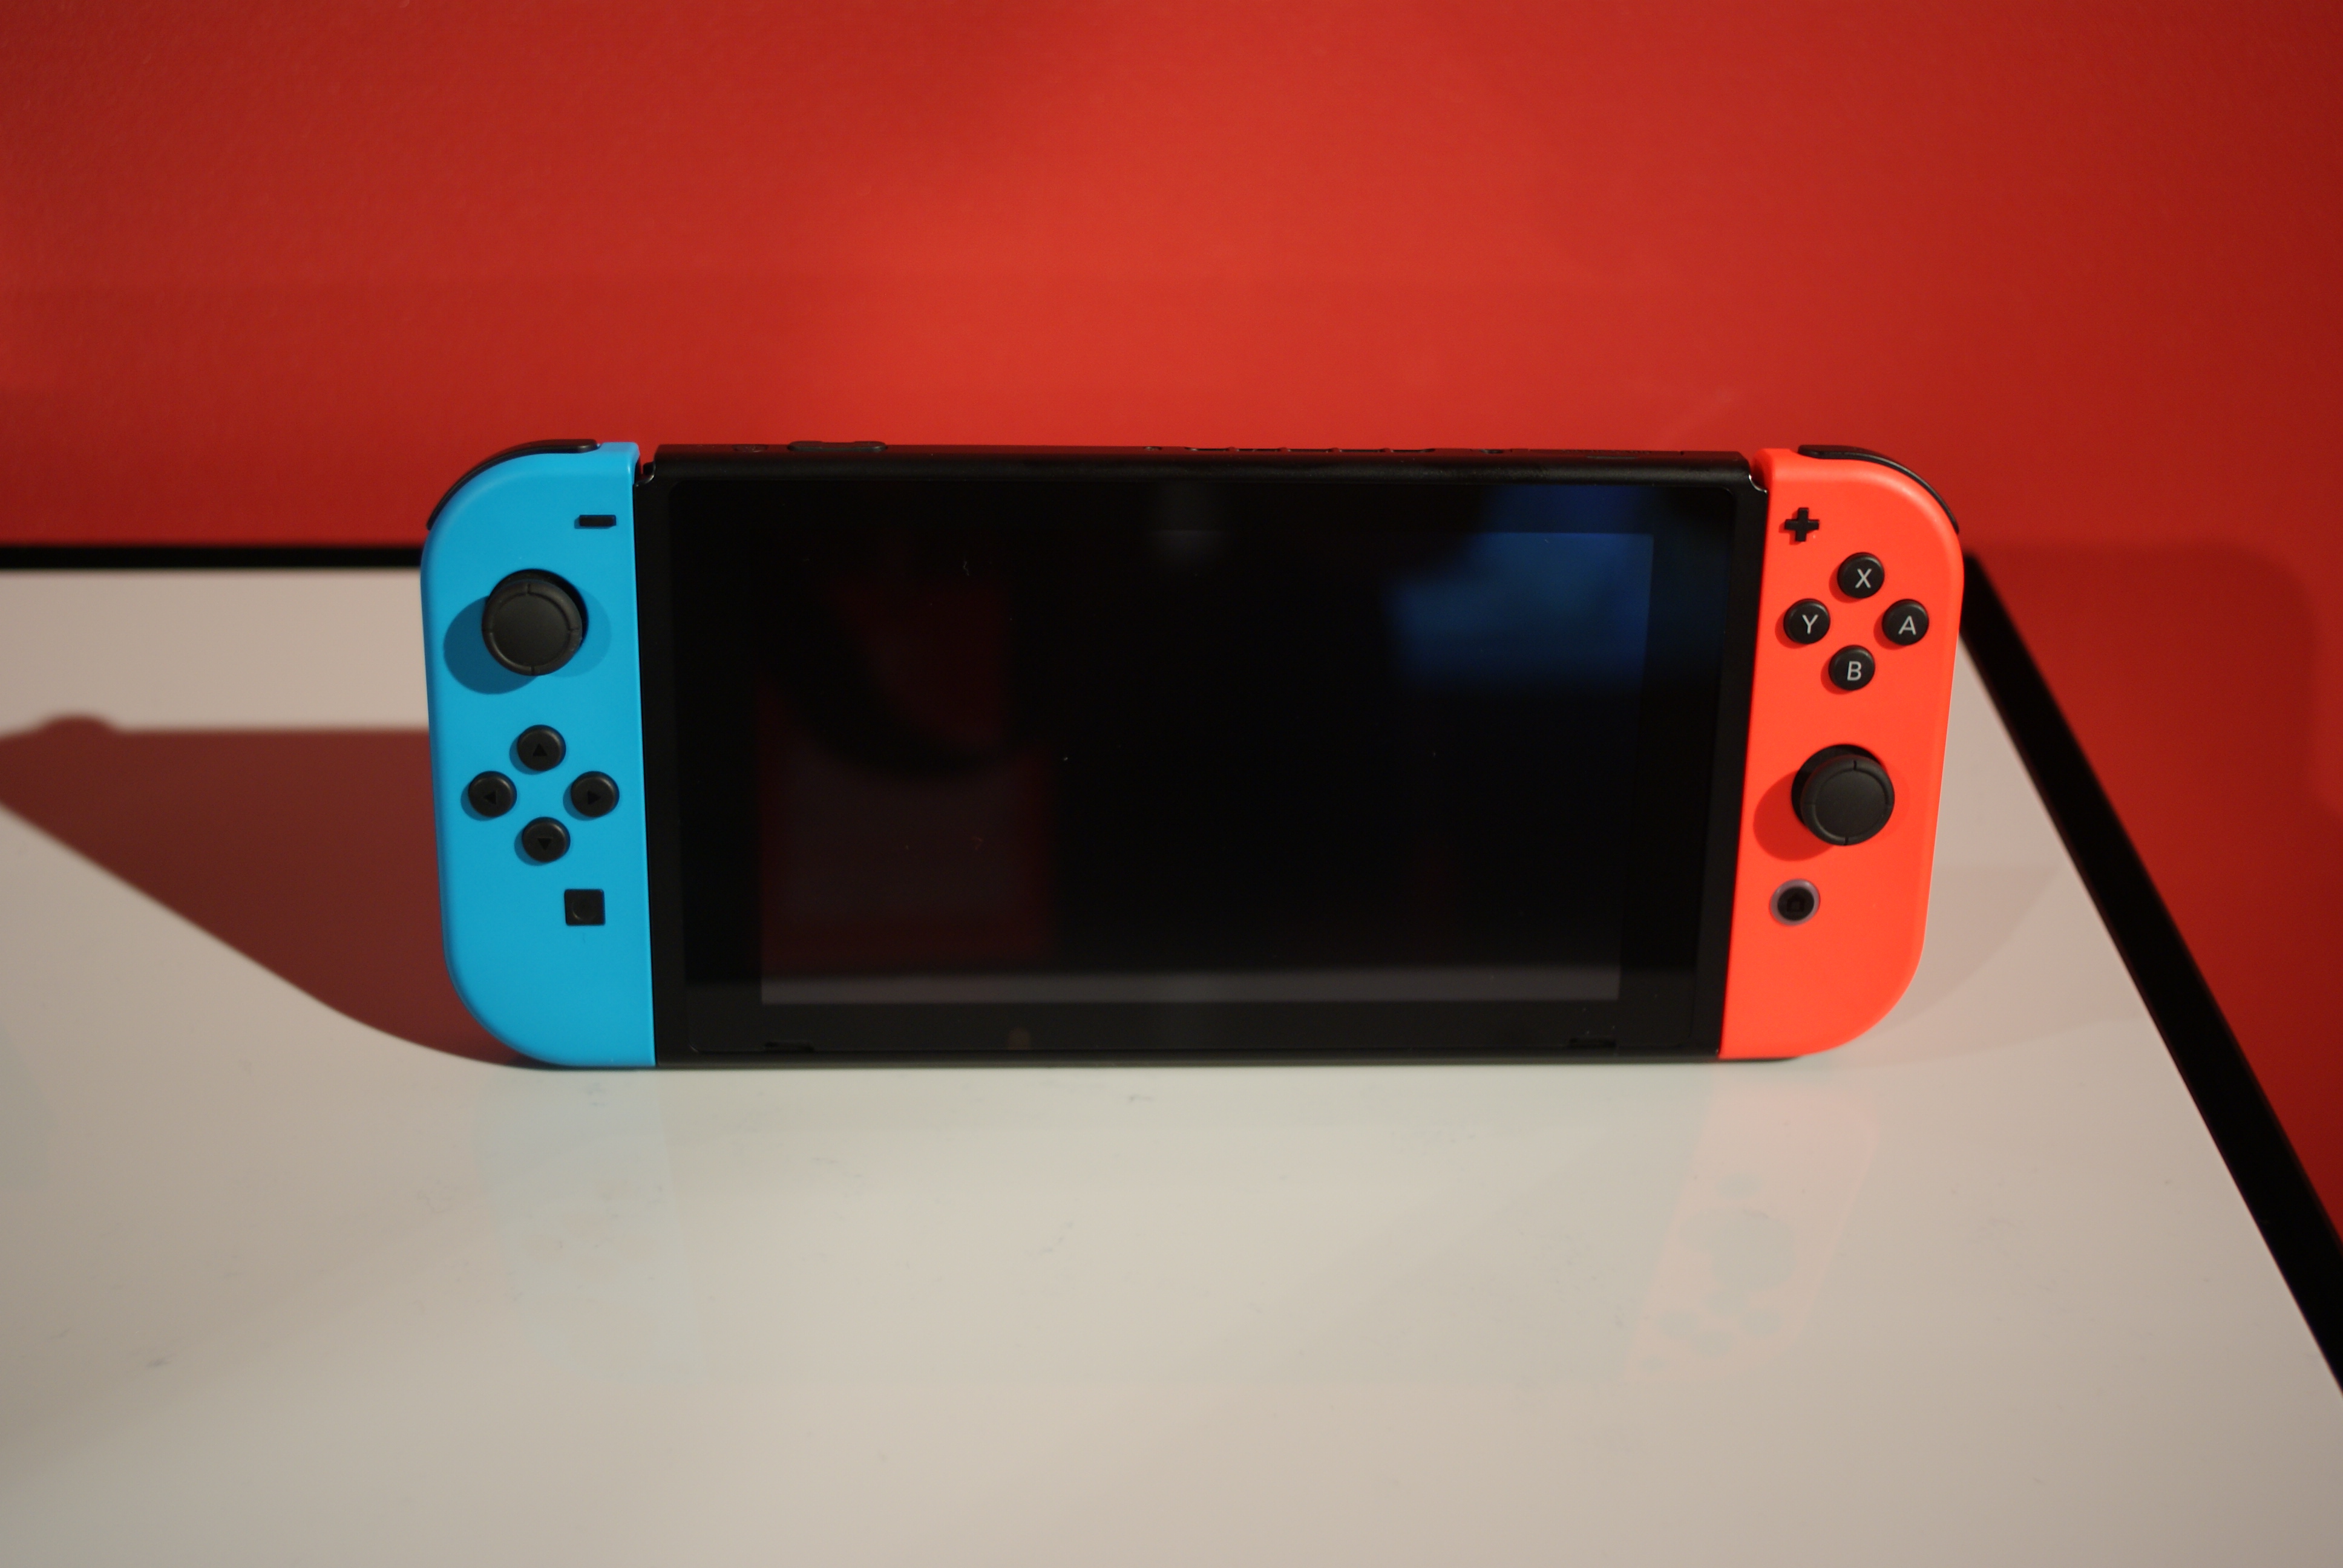 Nintendo Switch: The Cost of Portability